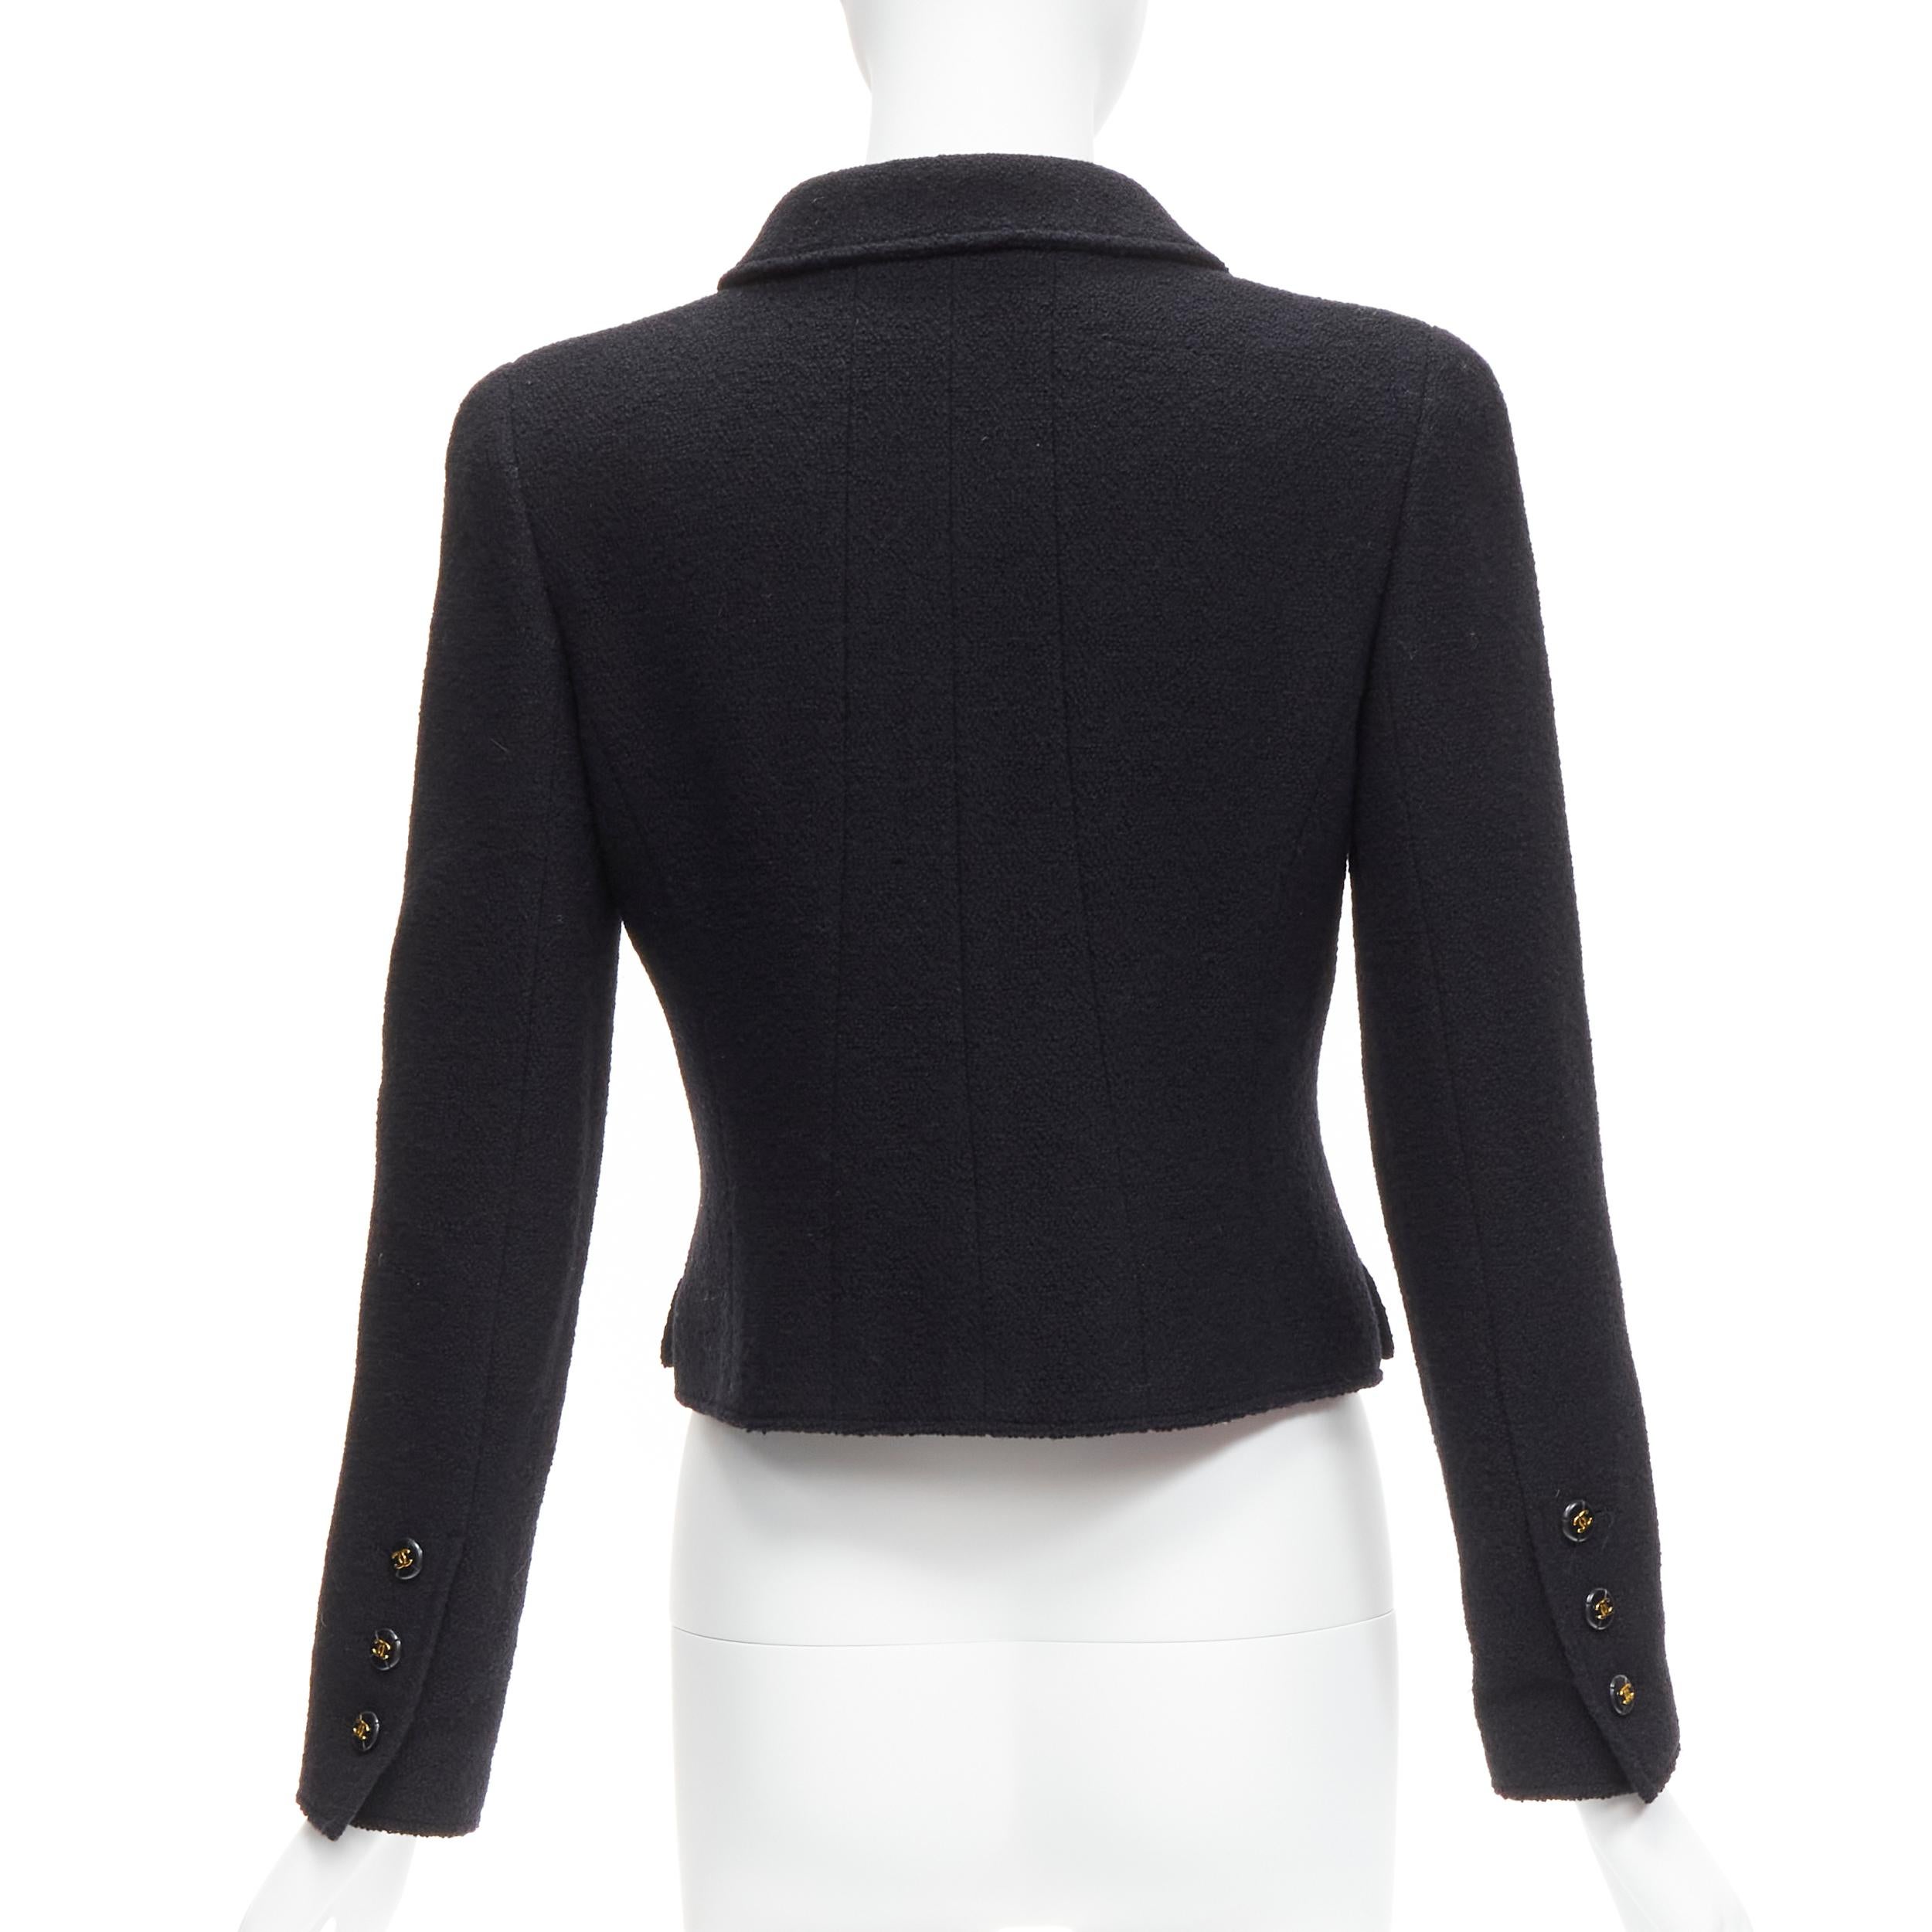 CHANEL 95P black wool crepe gold CC button 4 pocket cropped jacket top 2